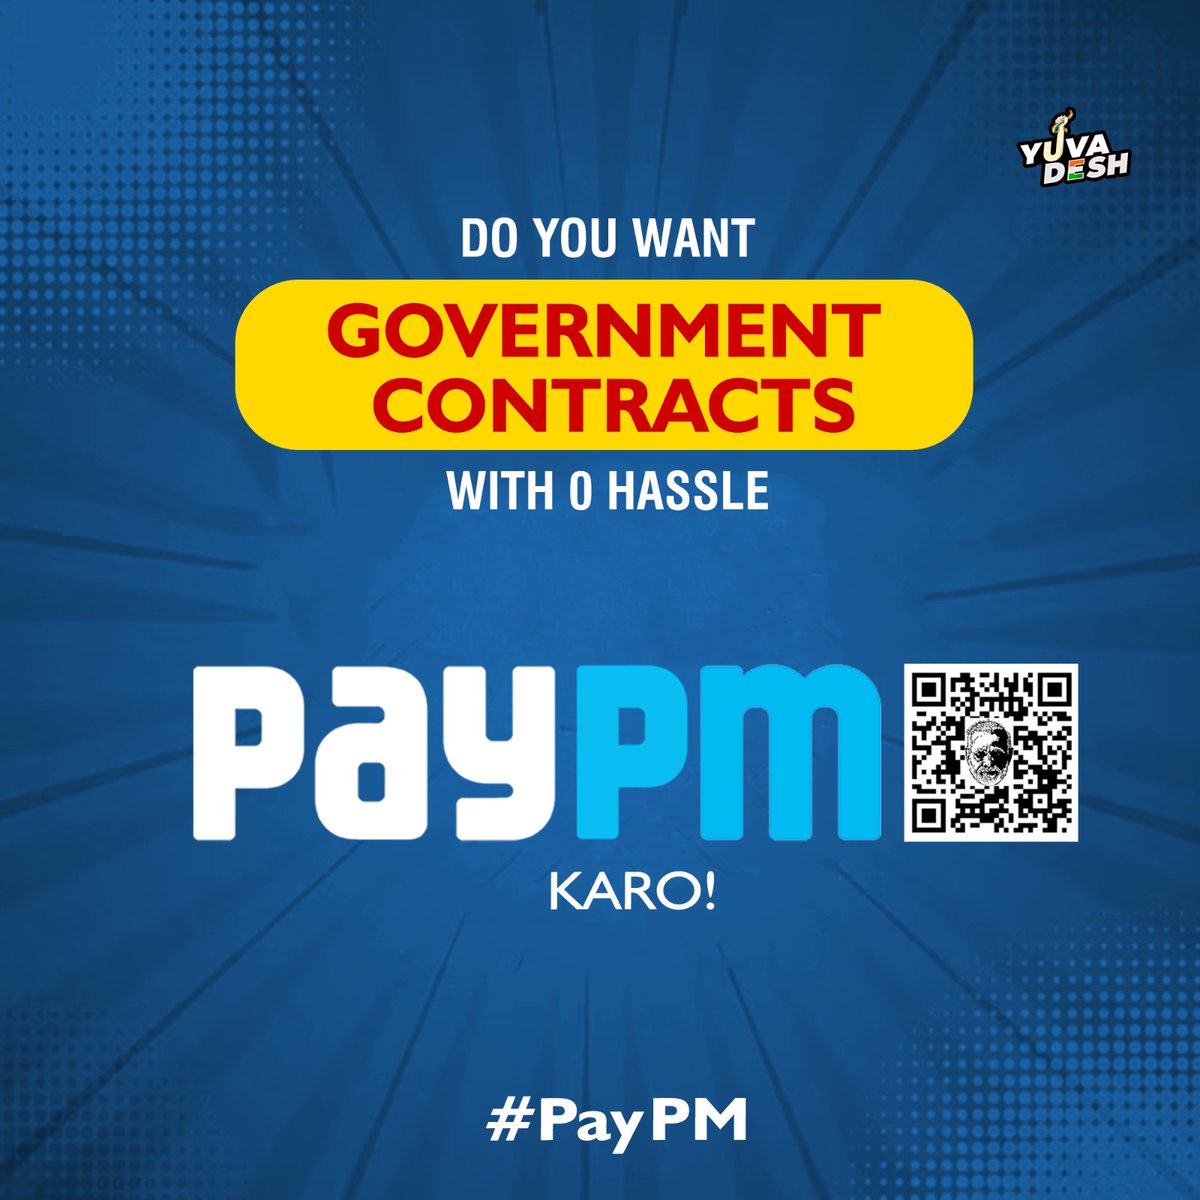 Do you want Government contracts with 0 hassle???

One solution
#PayPM karo!